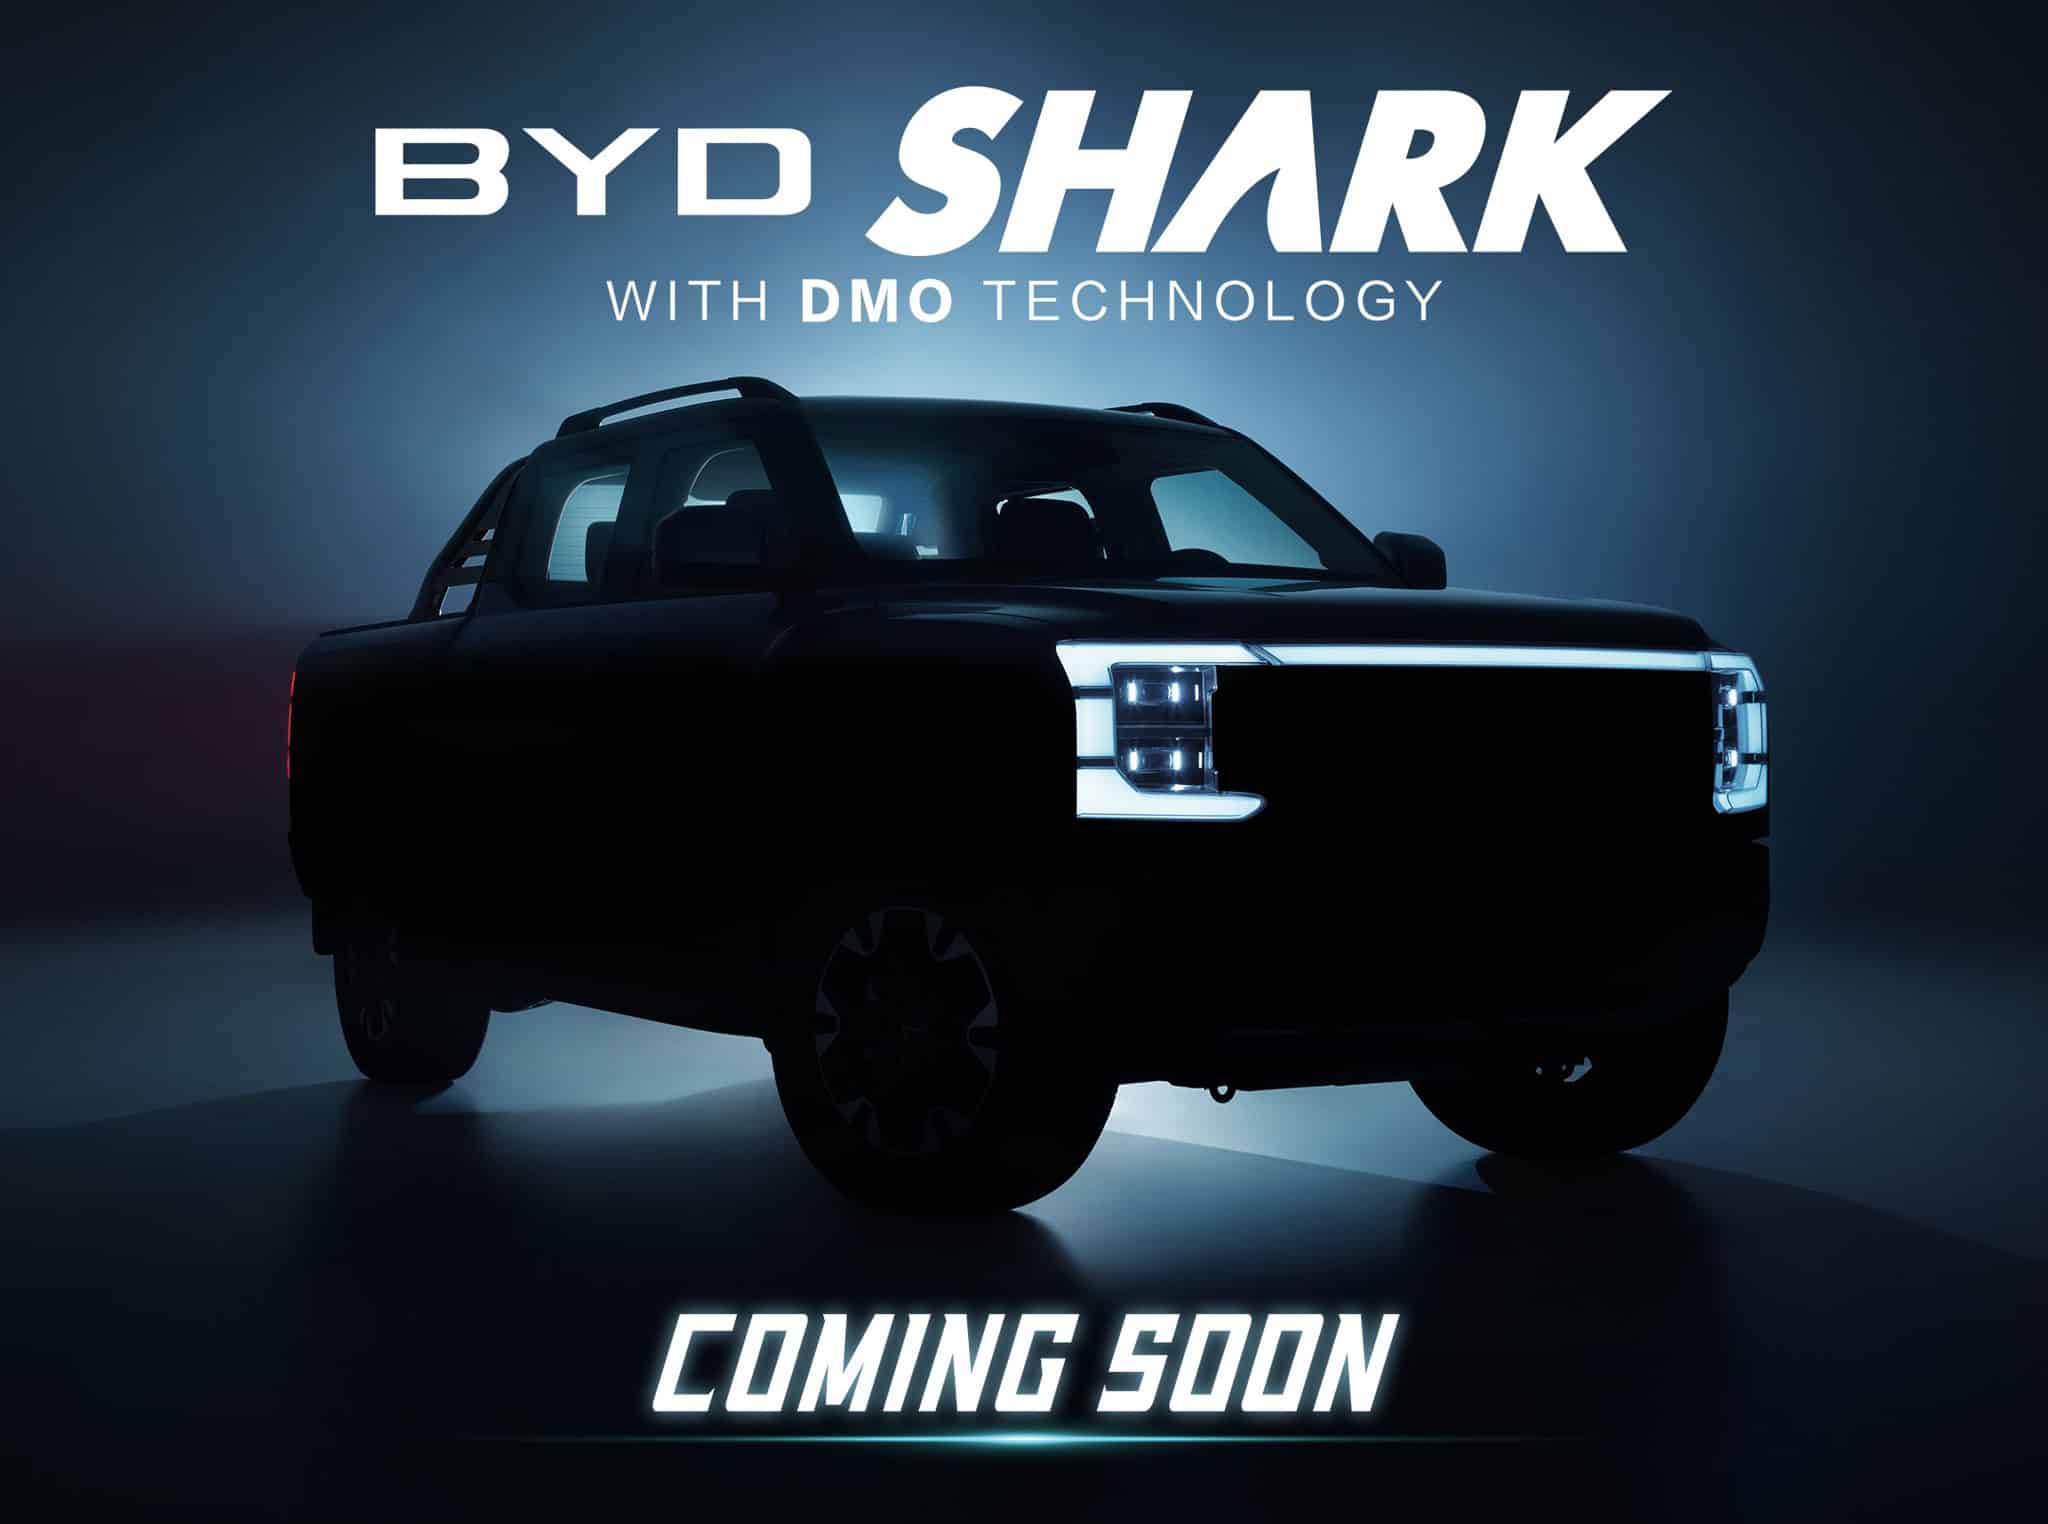 BYD Shark pickup truck to launch this week